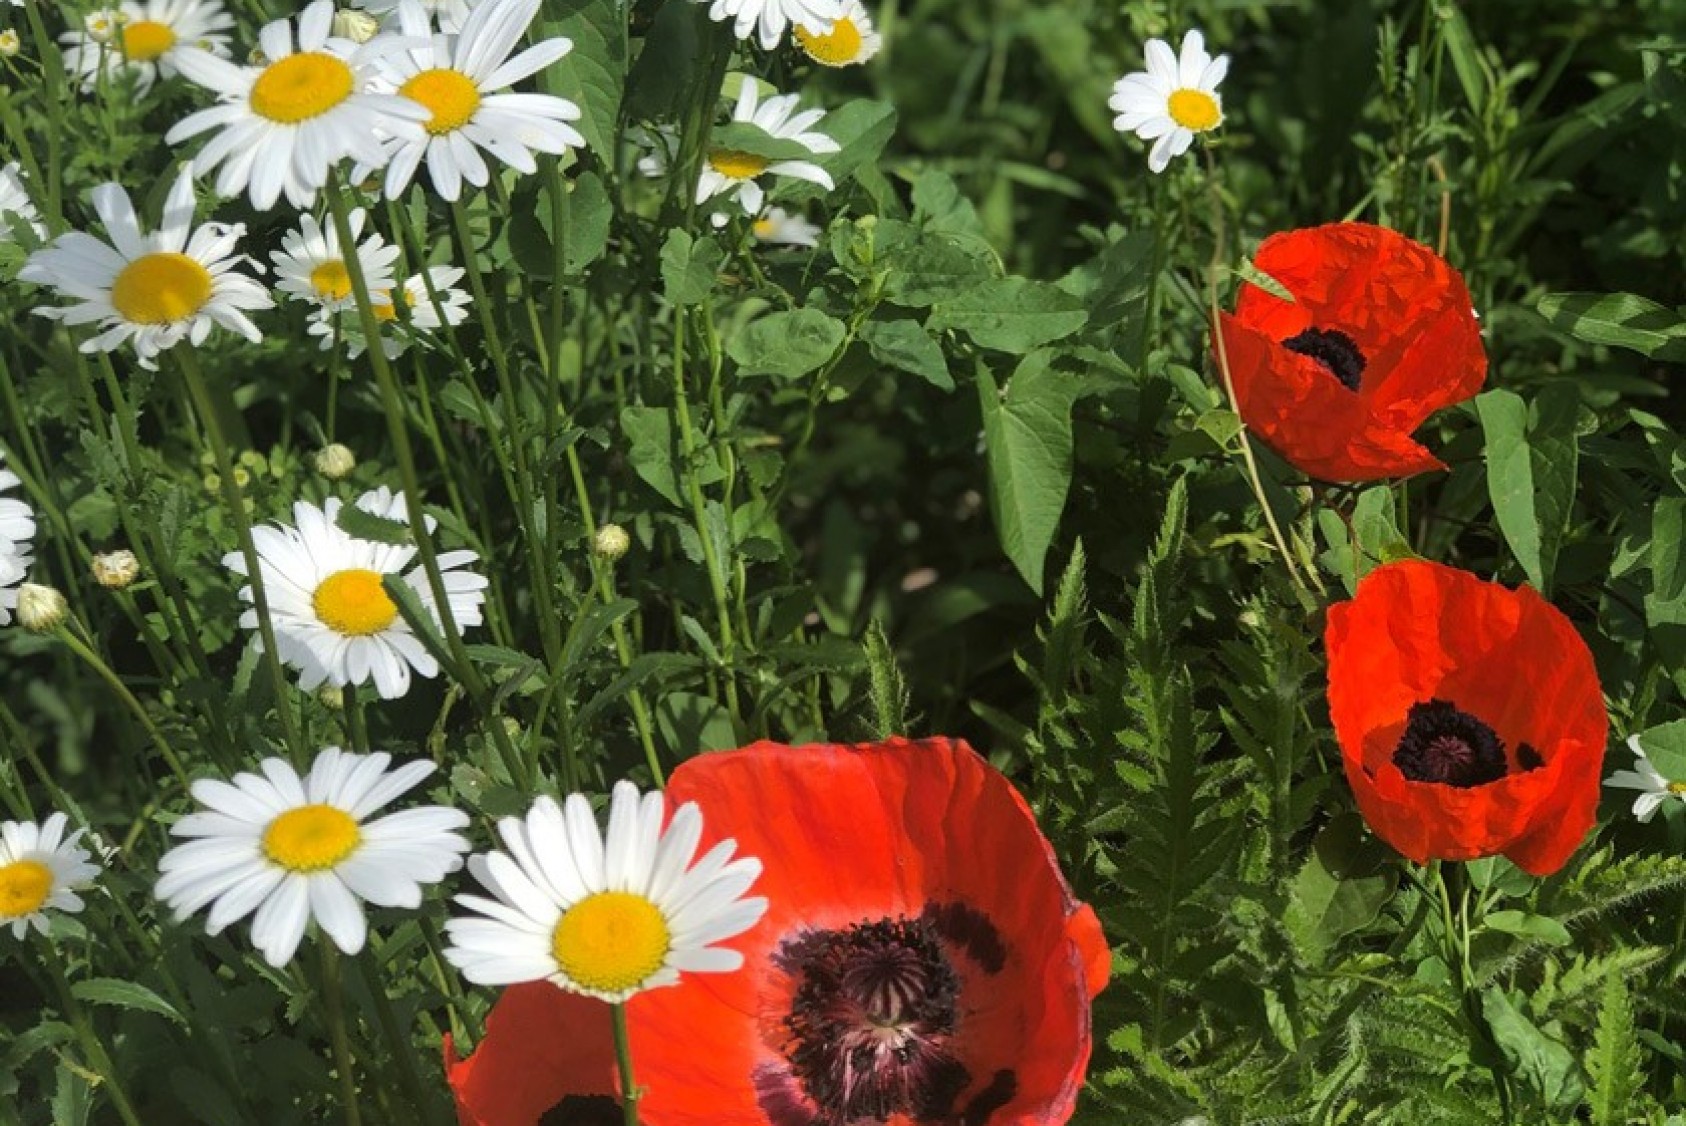 Half of Blake’s garden space is designated for pollinators and beneficial insects, including daisies and poppies.